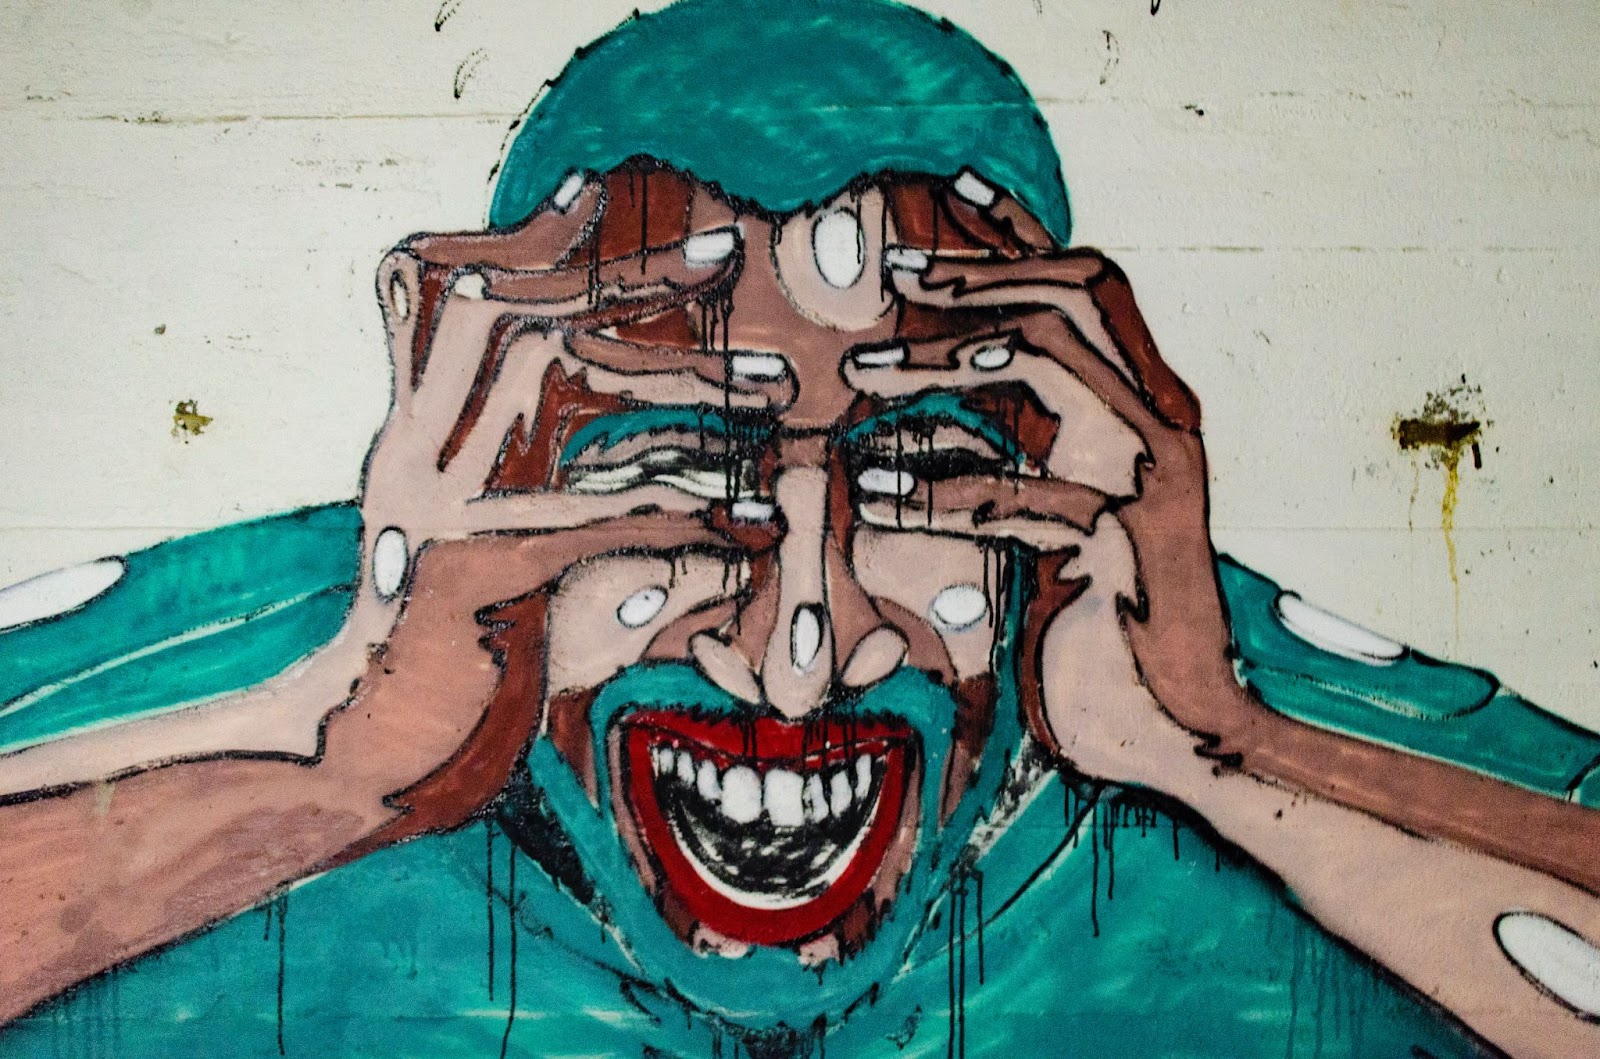 A painting of a person holding their face and screaming